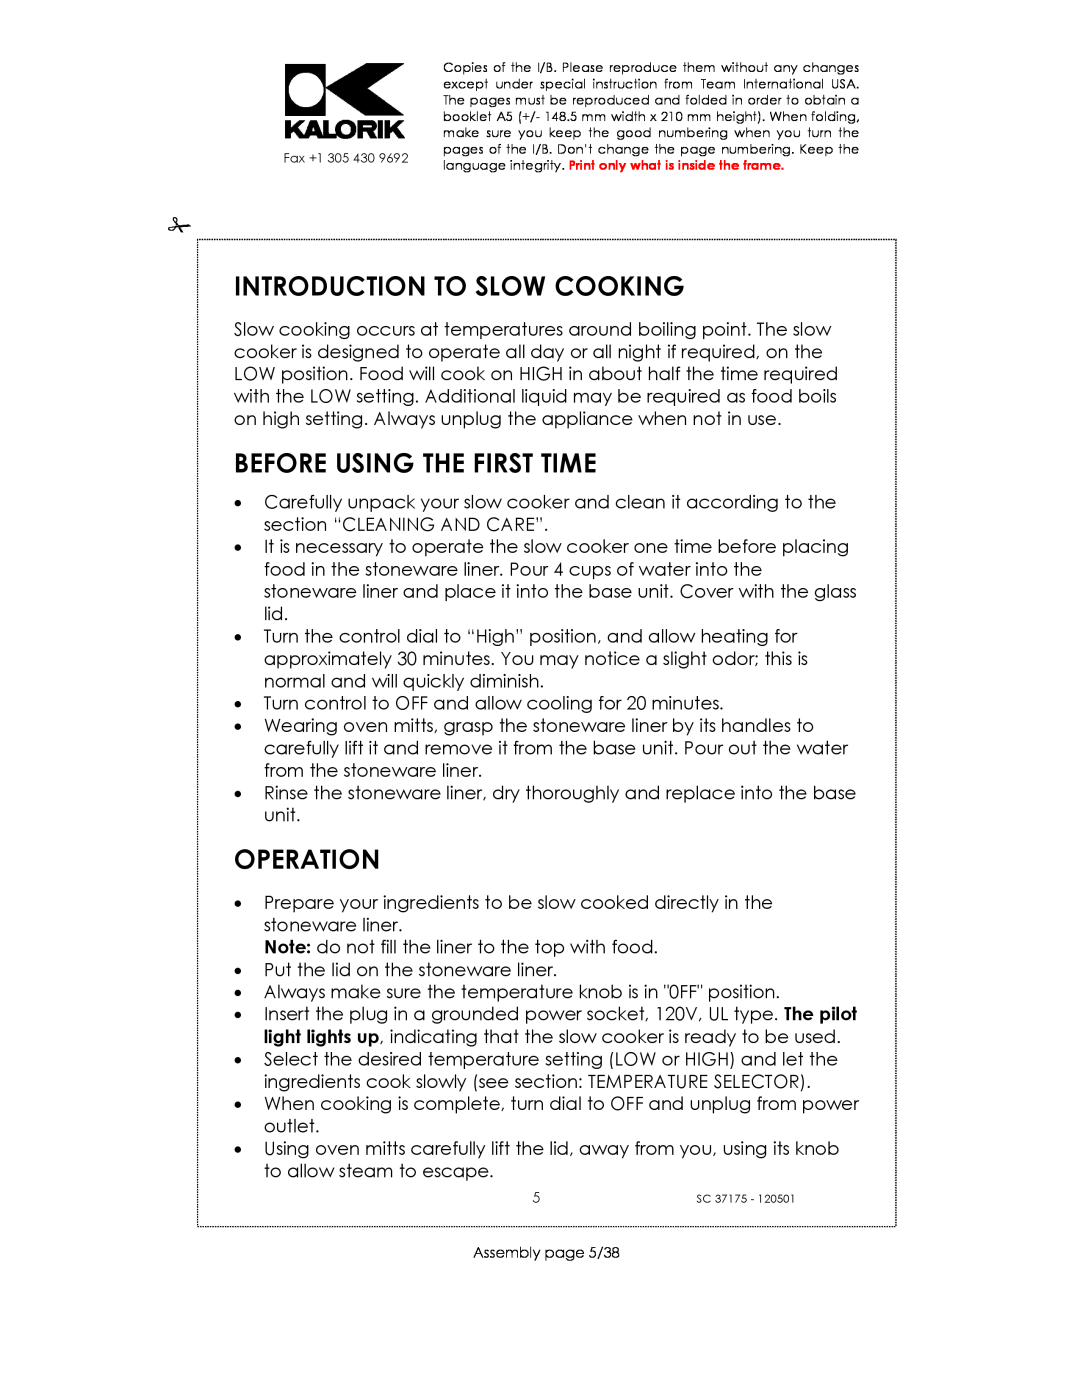 Kalorik SC 37175 manual Introduction To Slow Cooking, Before Using The First Time, Operation 